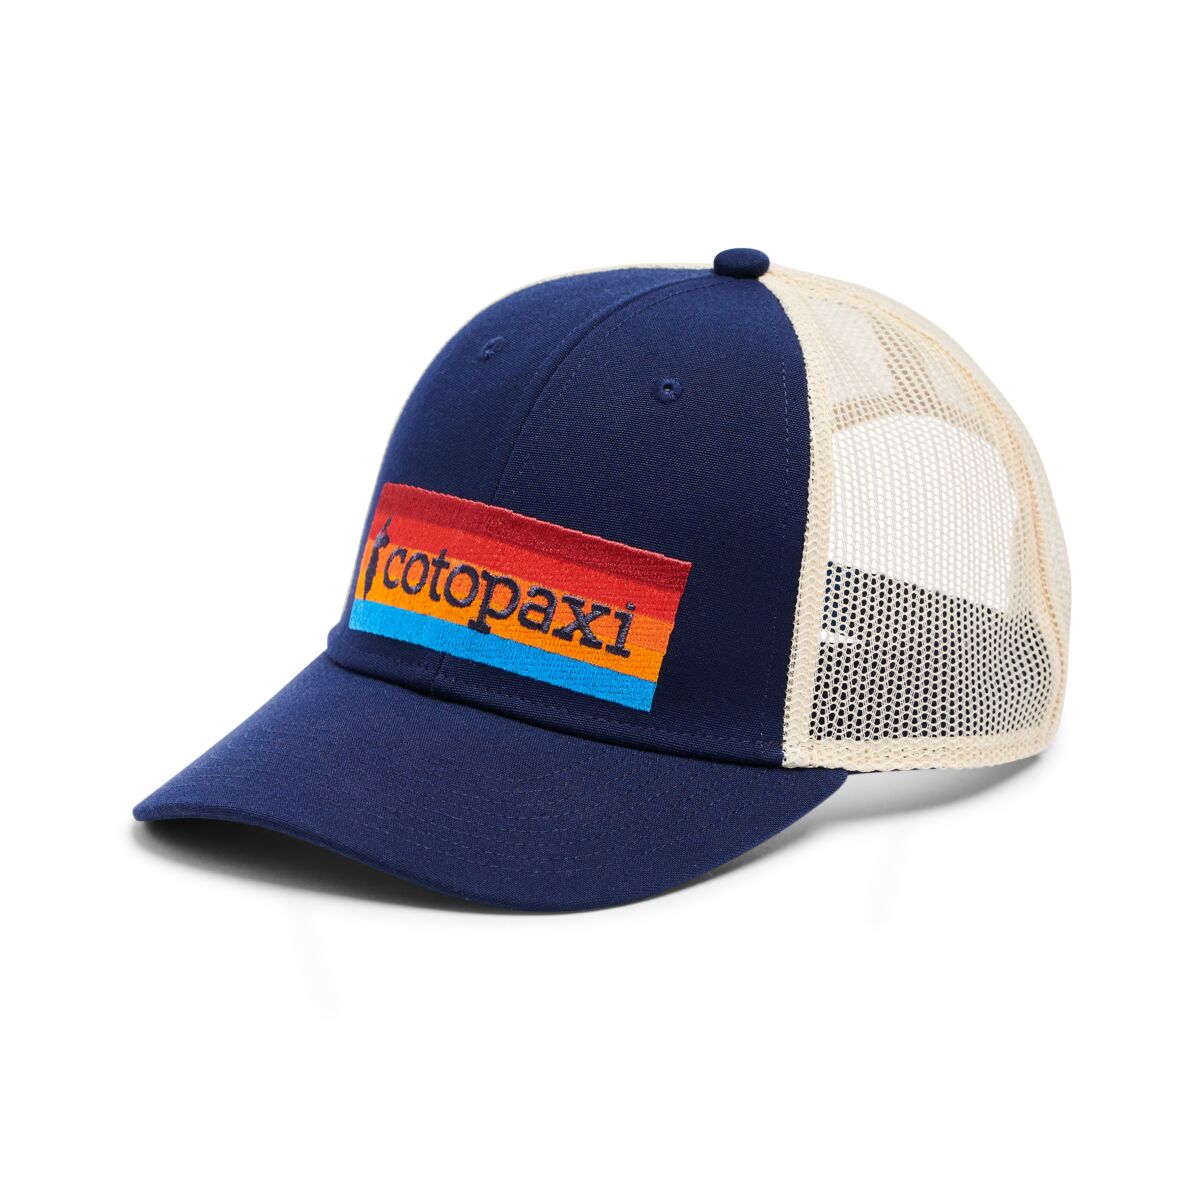 Cotopaxi On the Horizon Trucker Hat - 100% recycled polyester Maritime Headwear